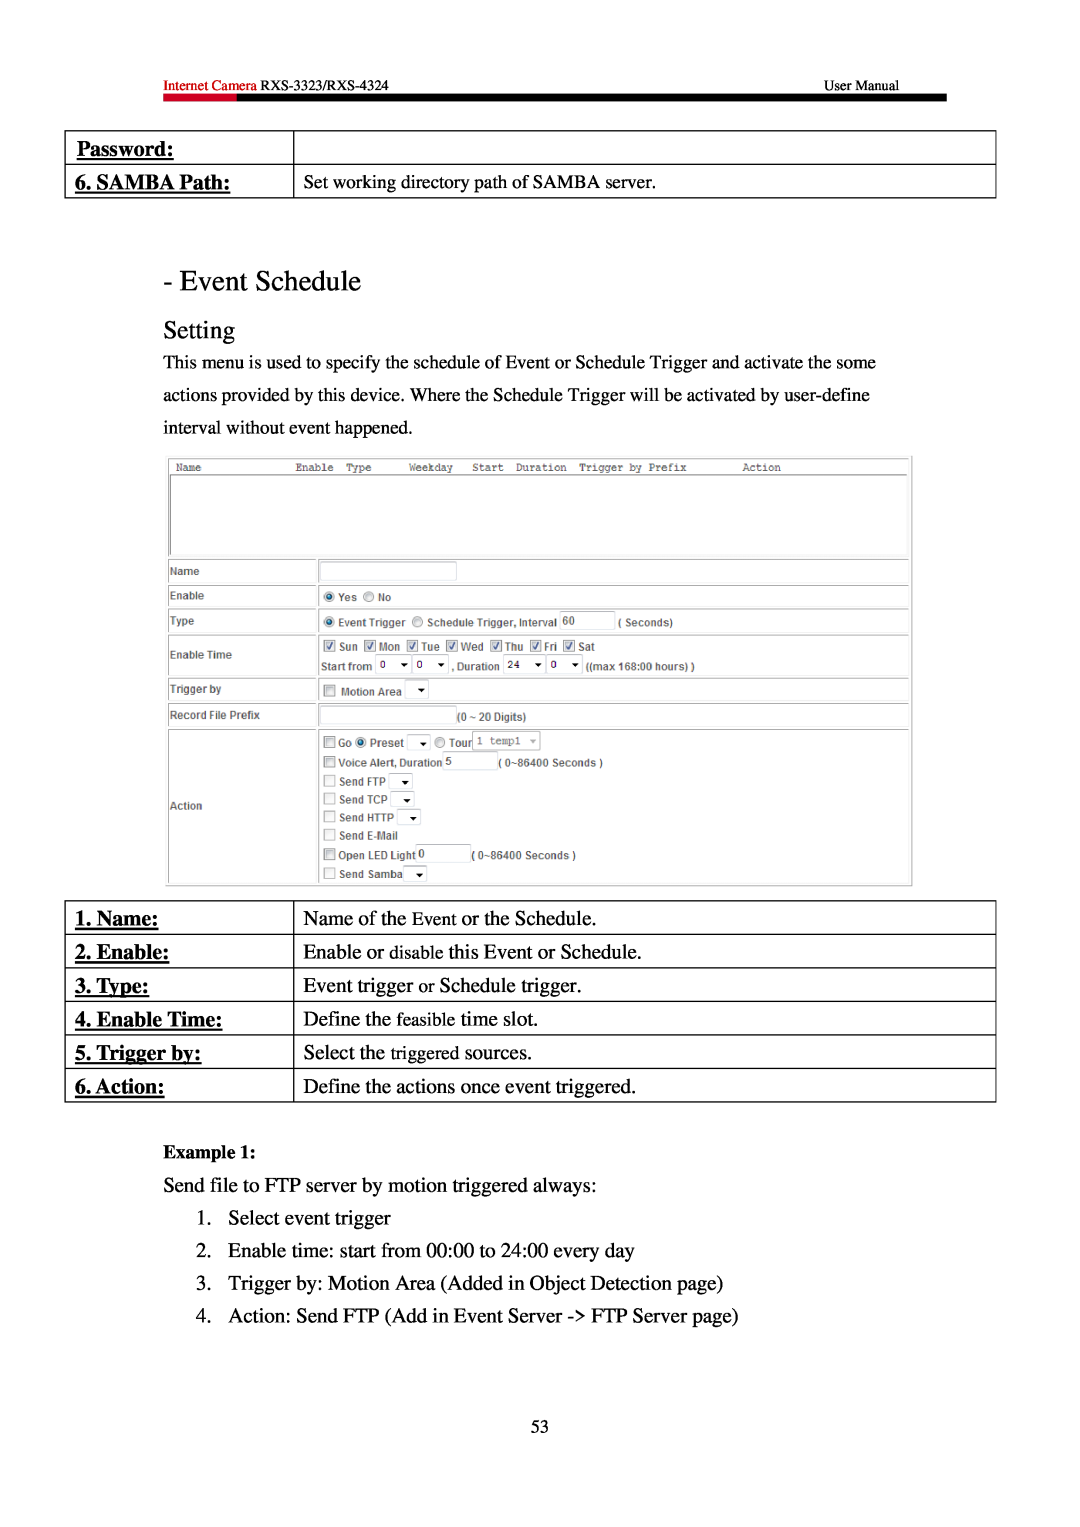 Rosewill RXS-4324, RXS-3323 user manual Event Schedule, Setting, Password 6. SAMBA Path 